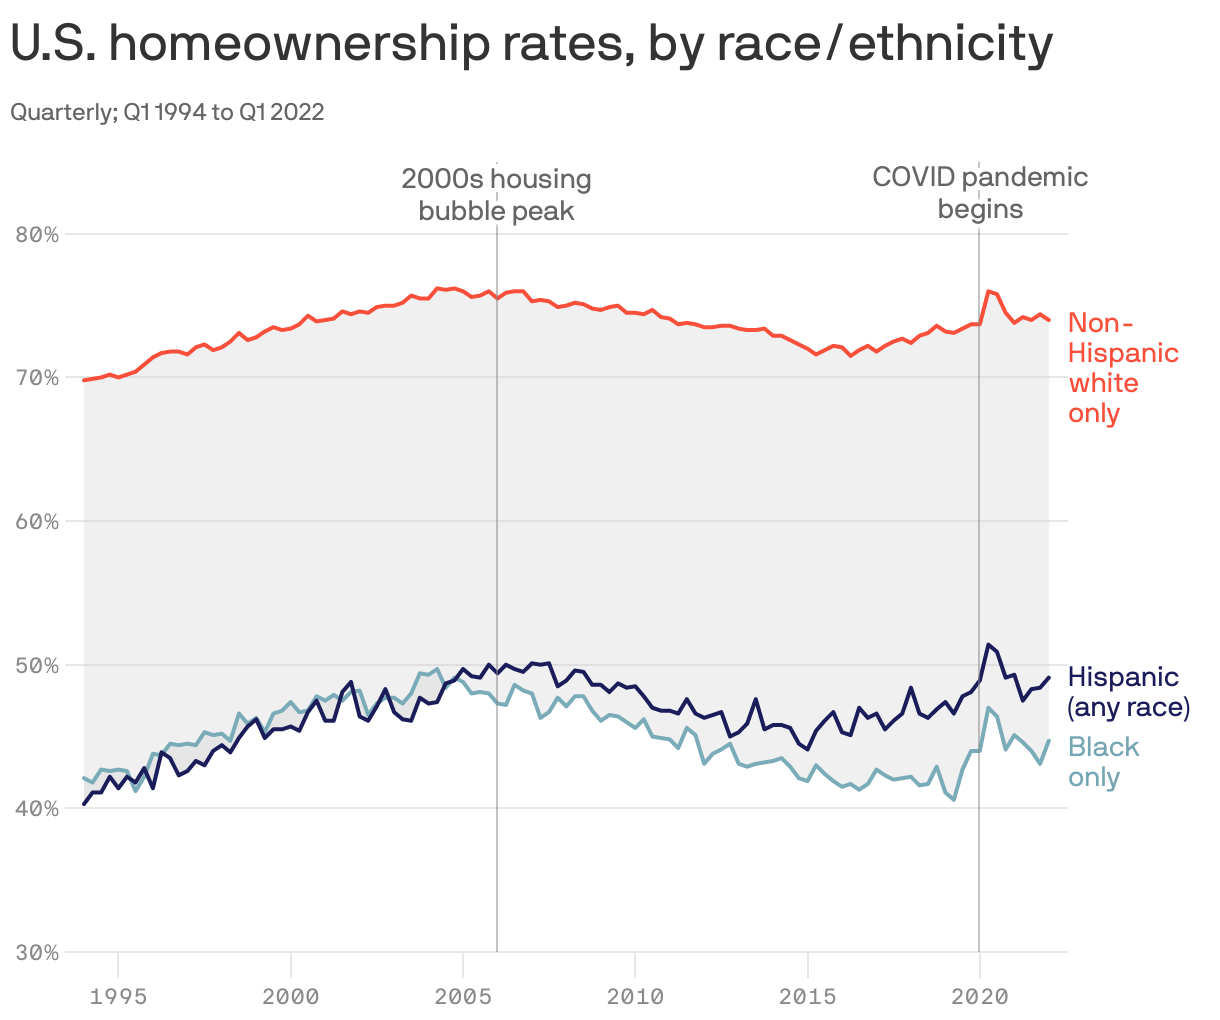 U.S. homeownership rates, by race/ethnicity